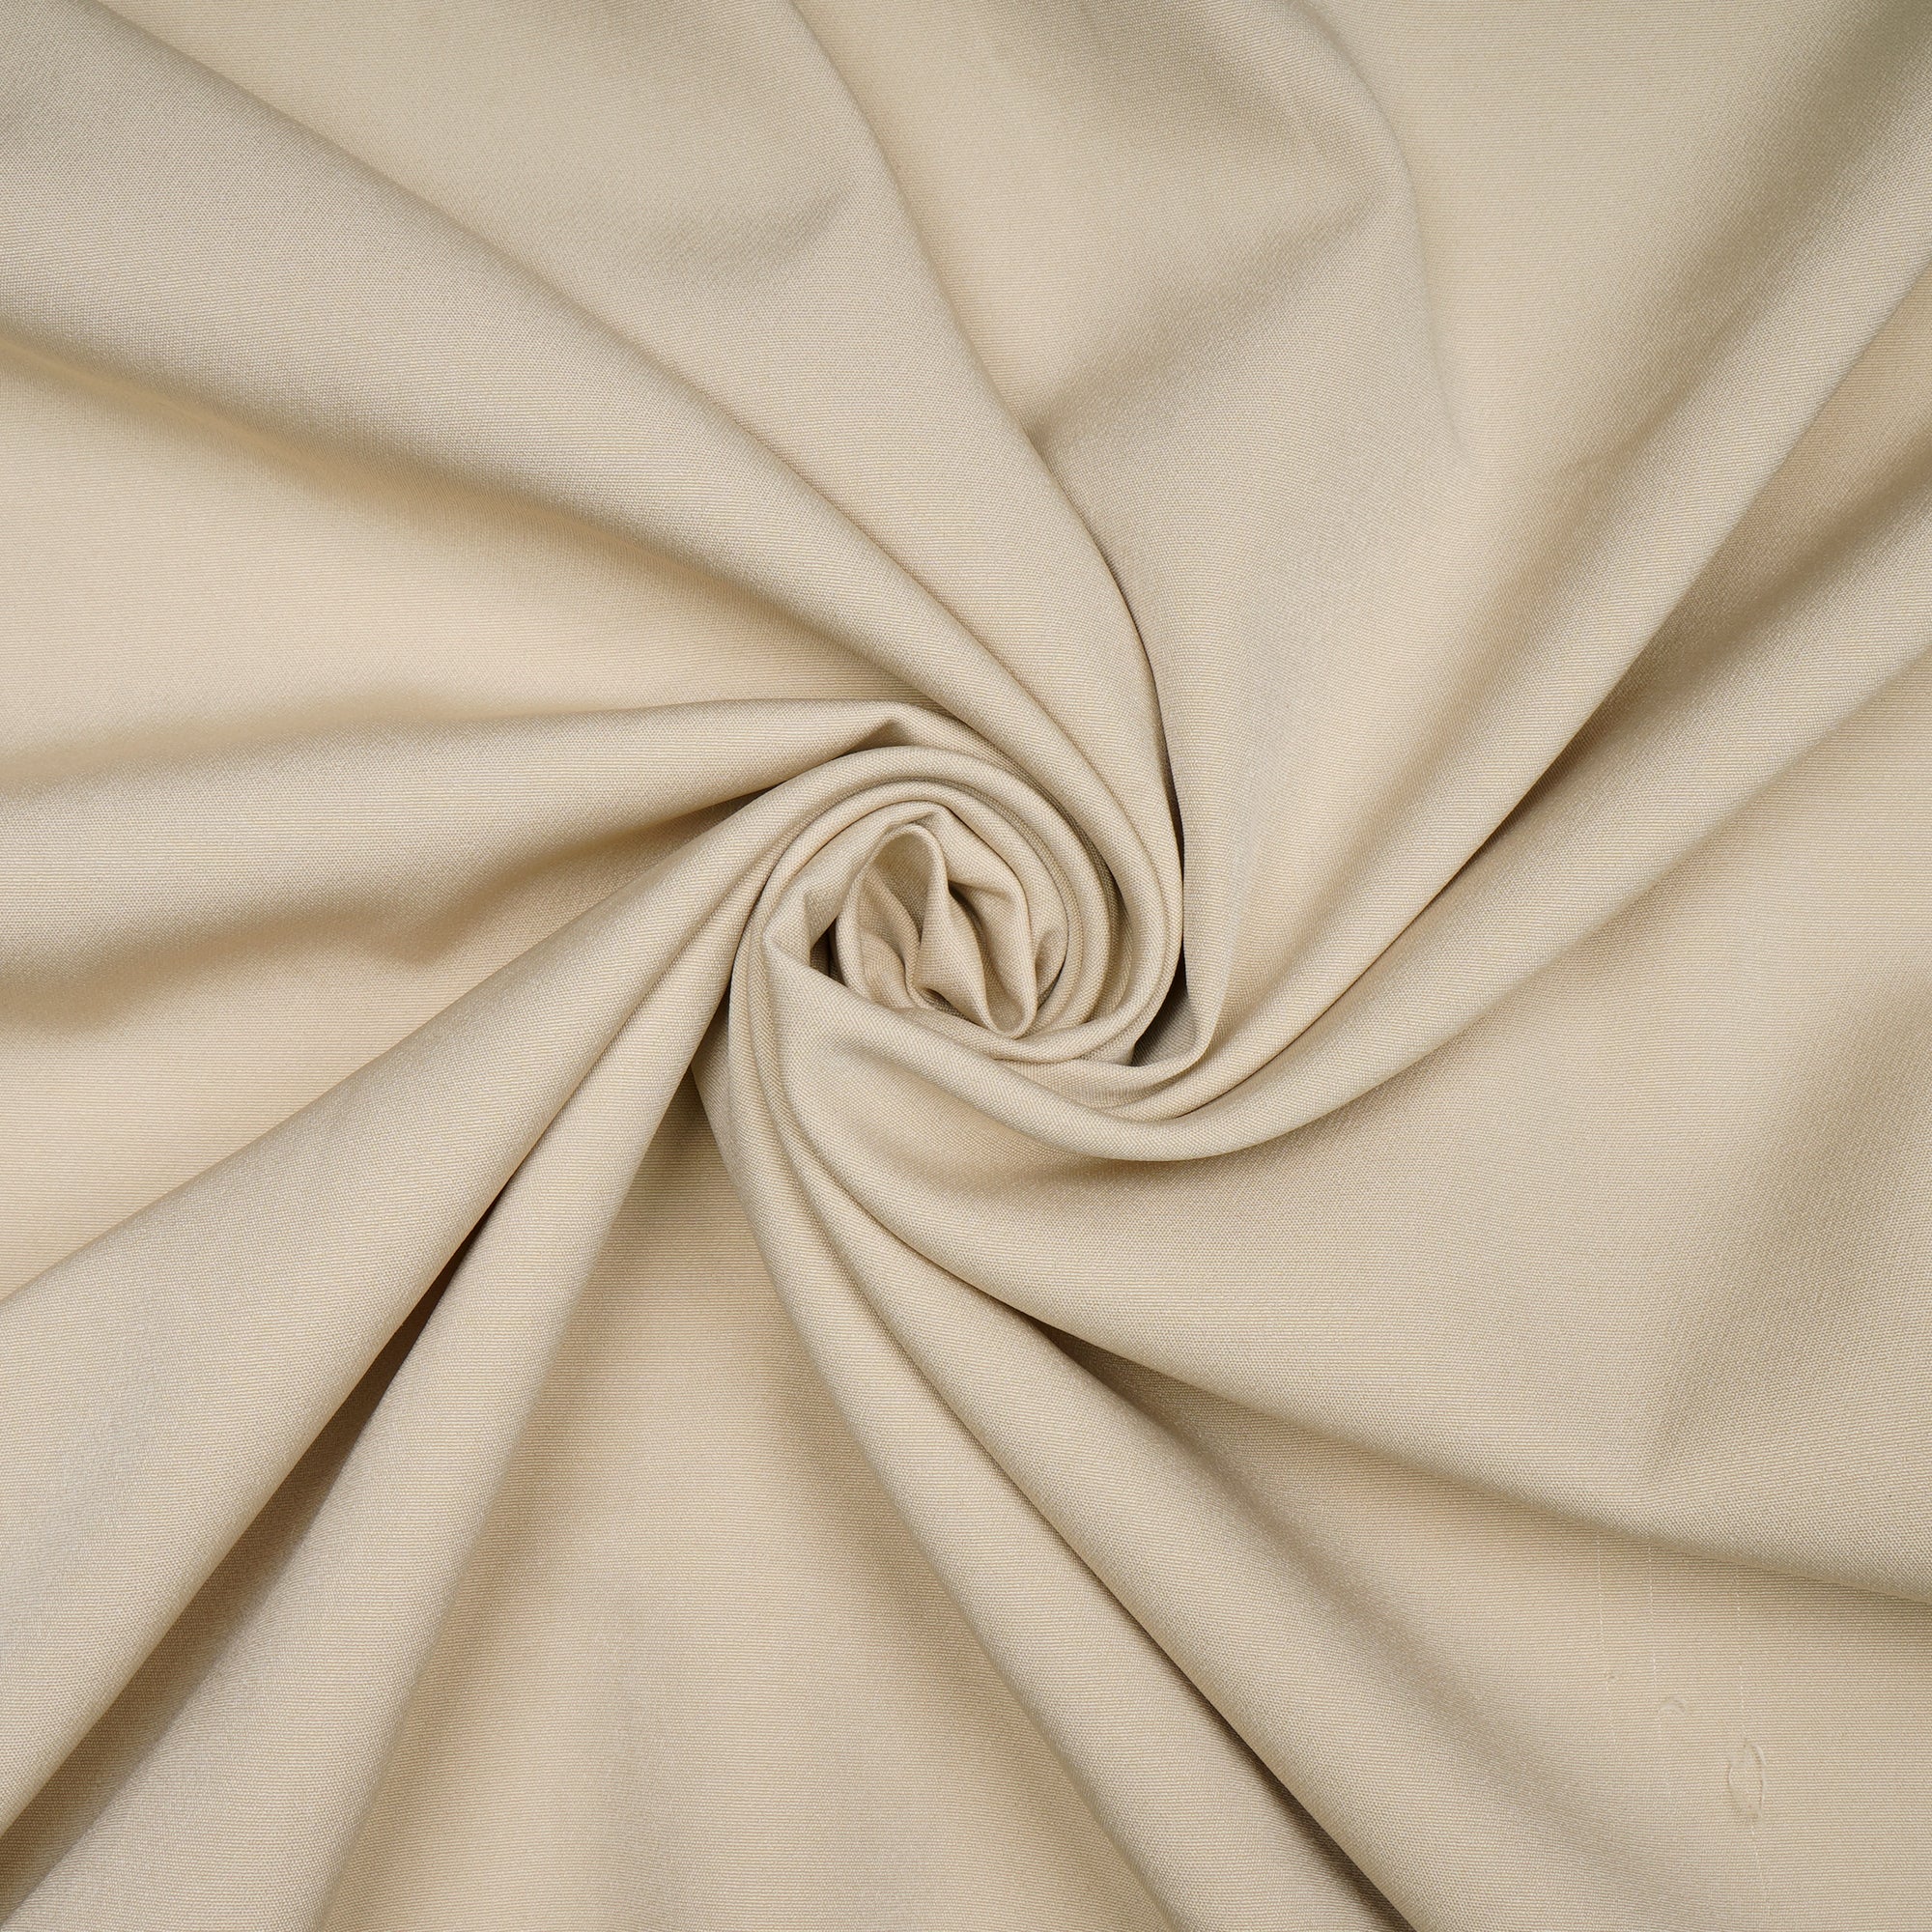 Oyster Grey Solid Dyed Imported Banana Crepe Fabric (60" Width)